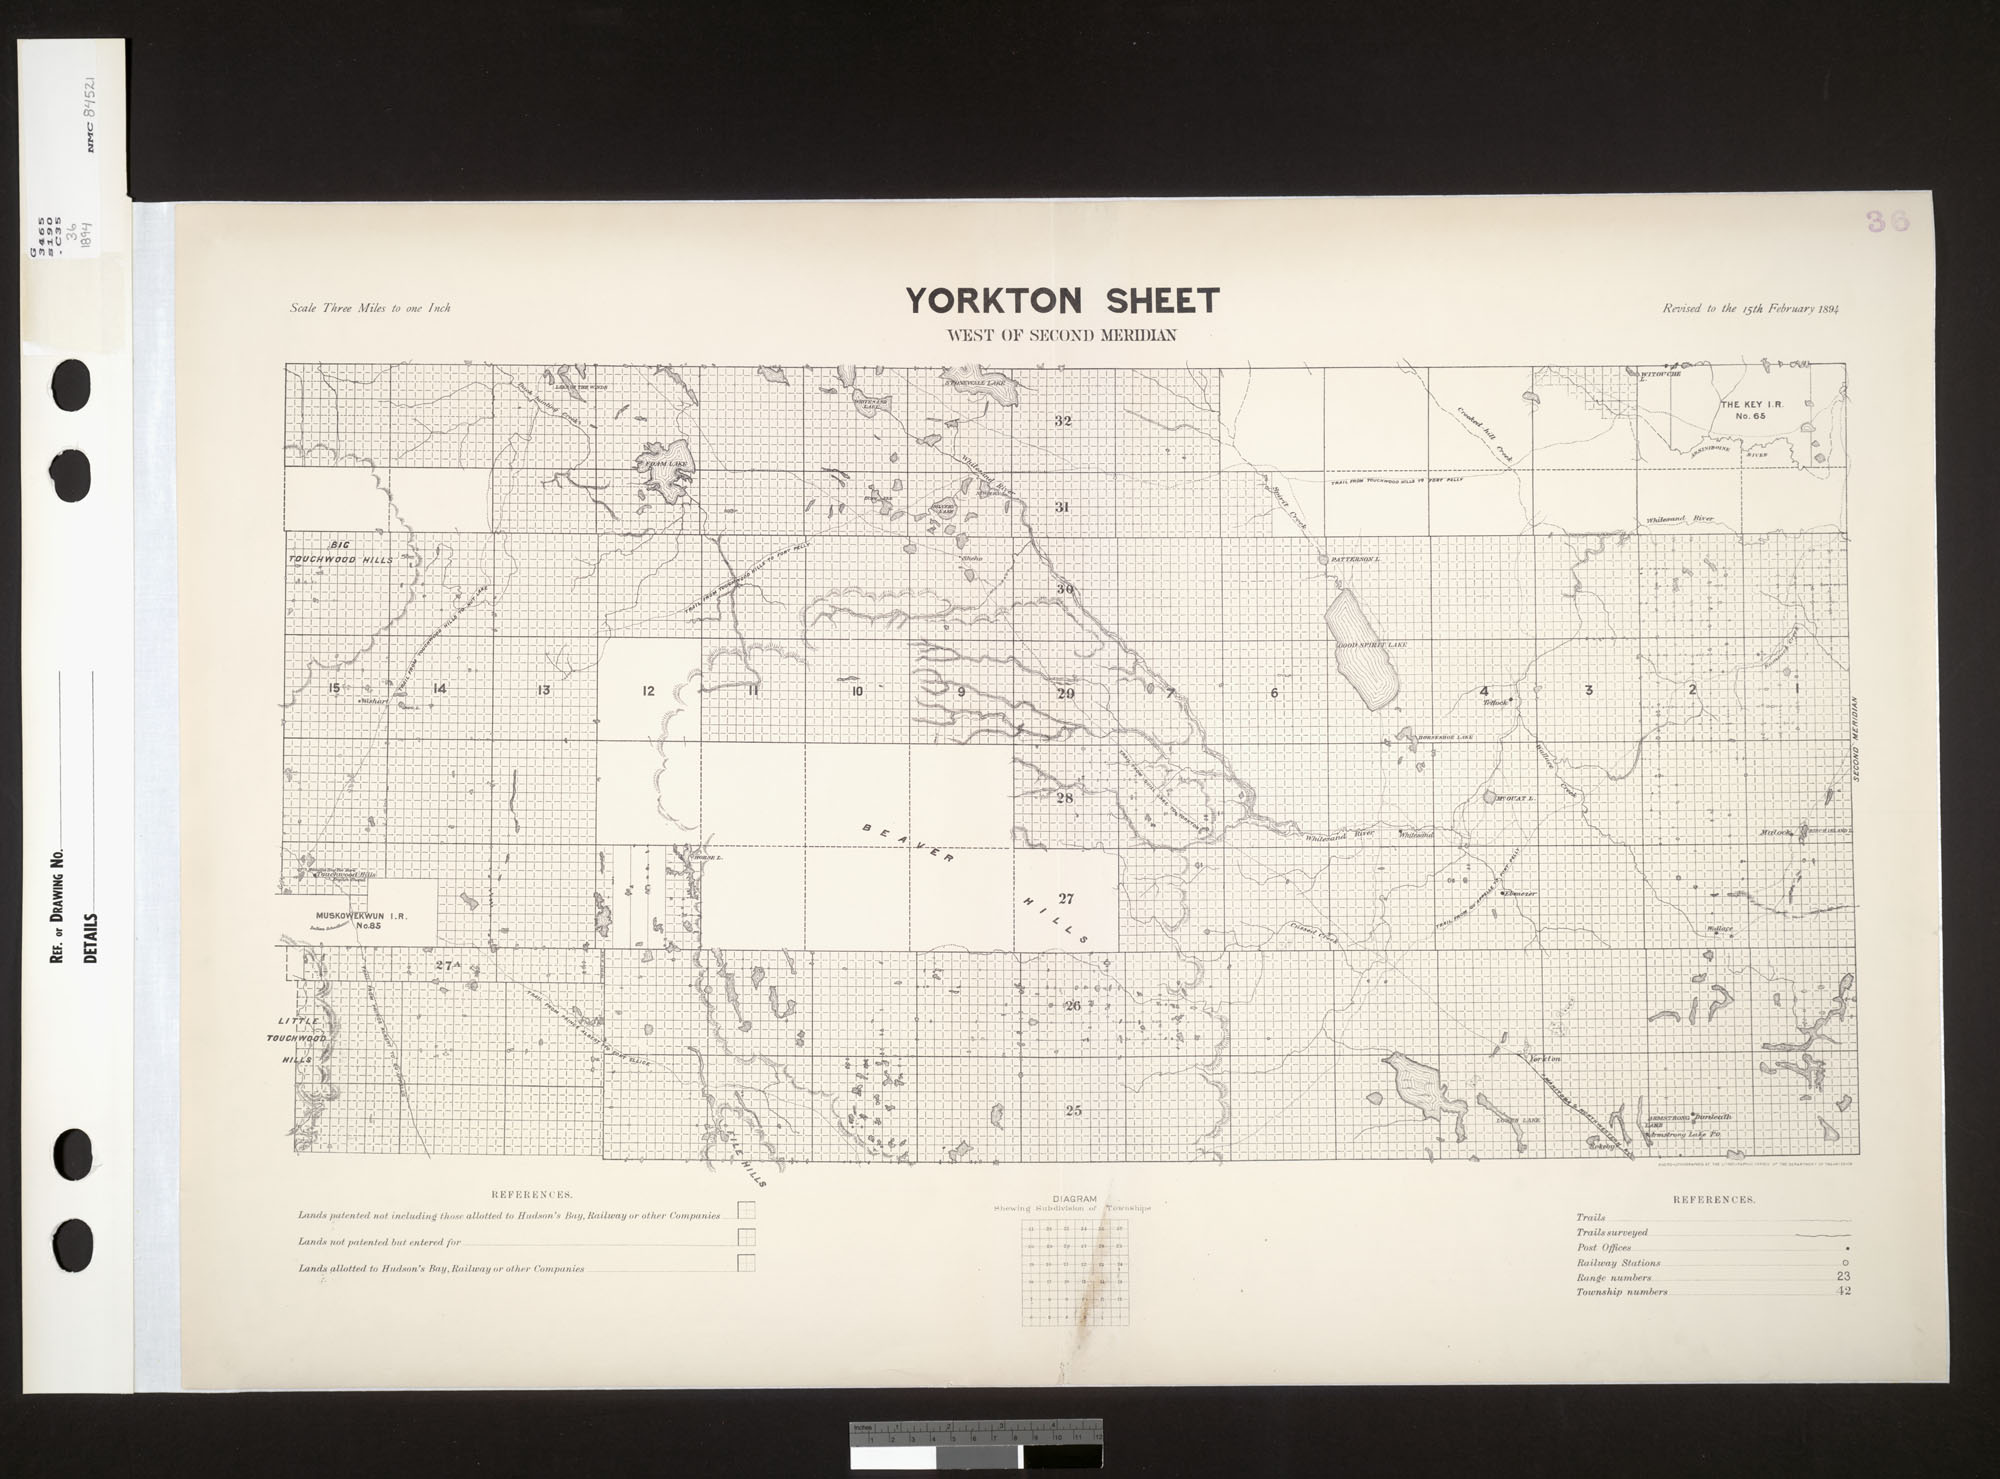 Digitized image of map no. 36, Yorkton, west of the second meridian, MIKAN 3697281, image number e002419198